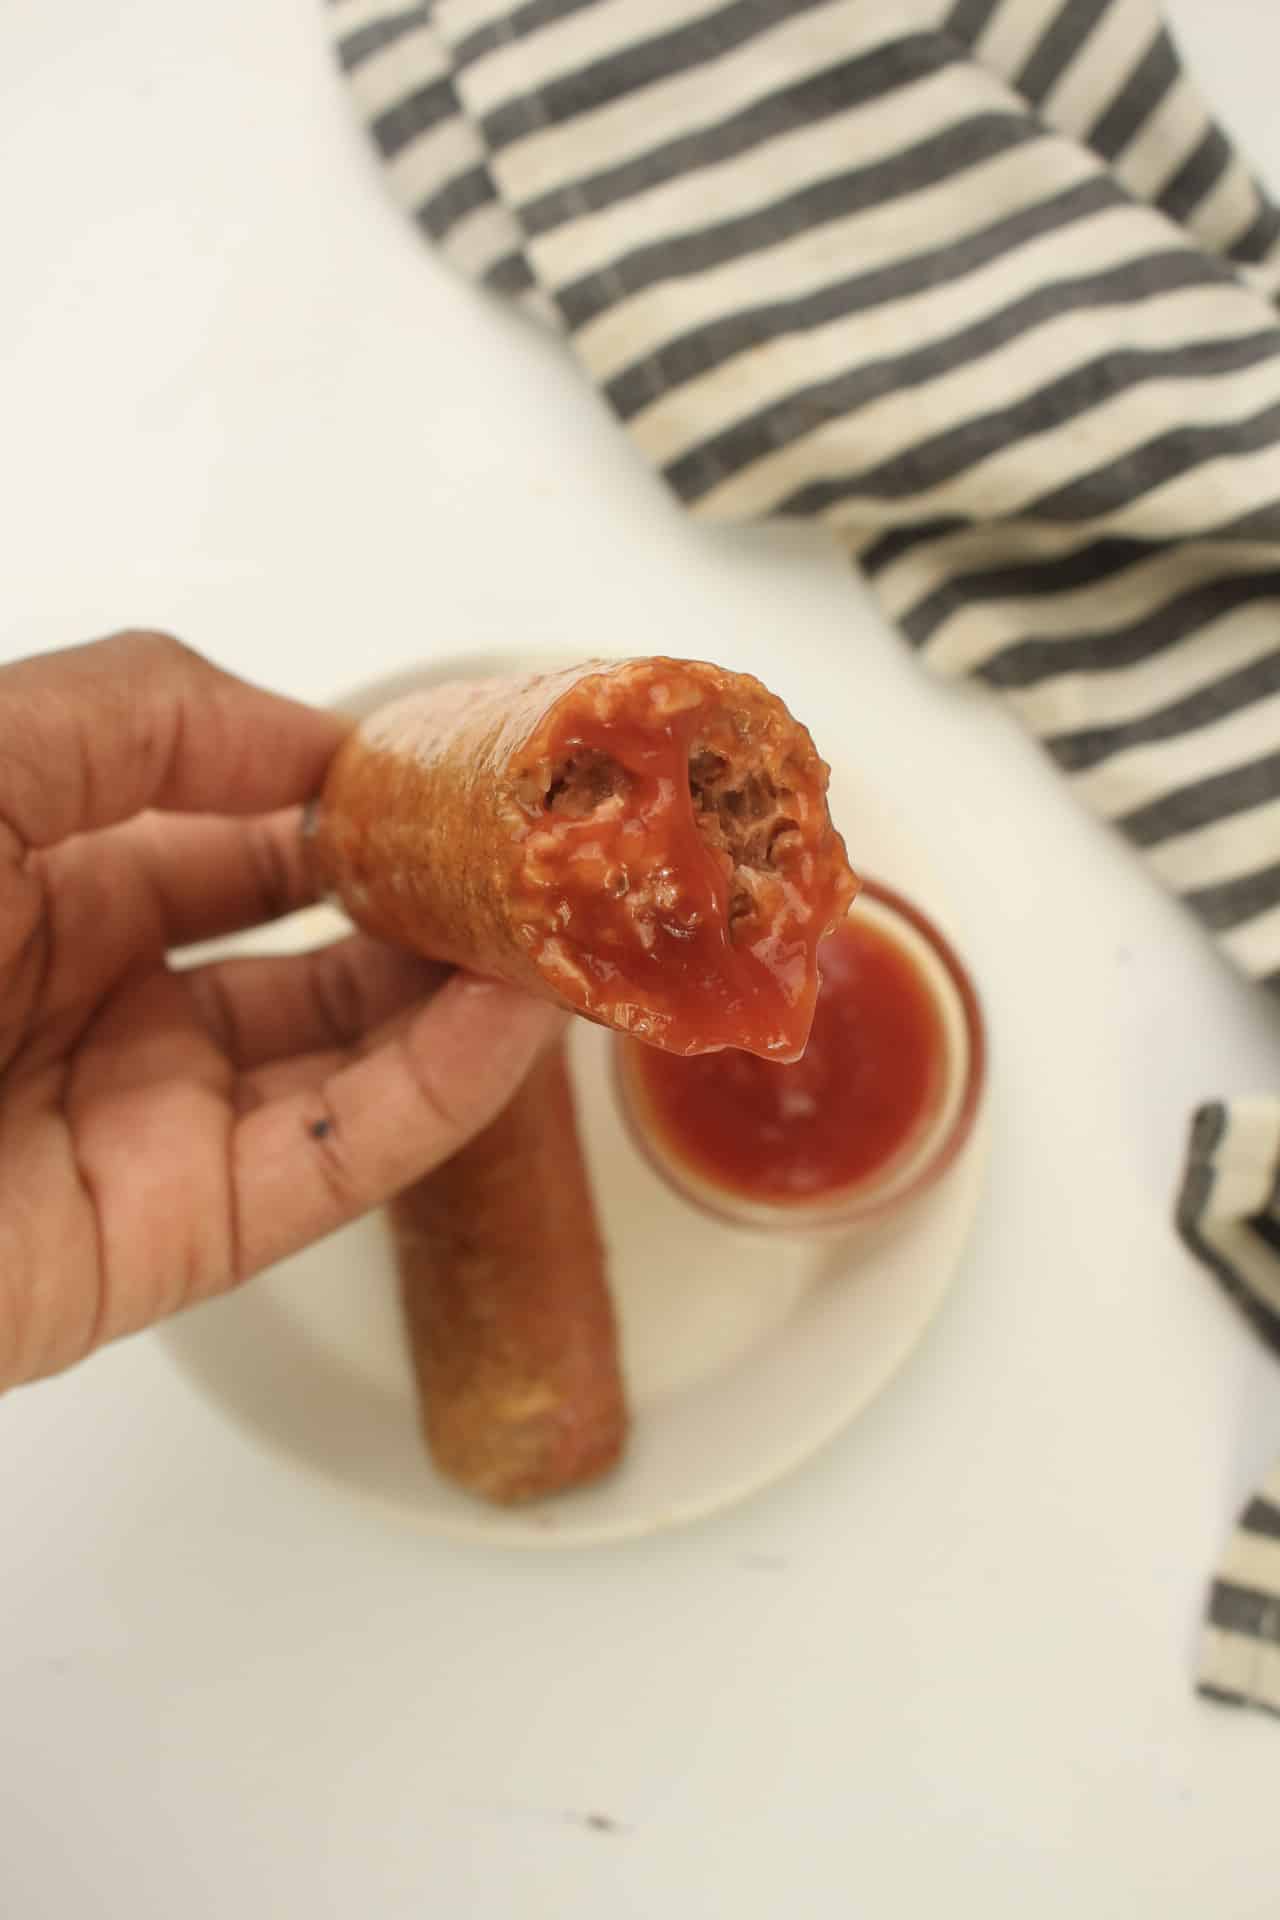 Air fryer Beyond Sausage with ketchup